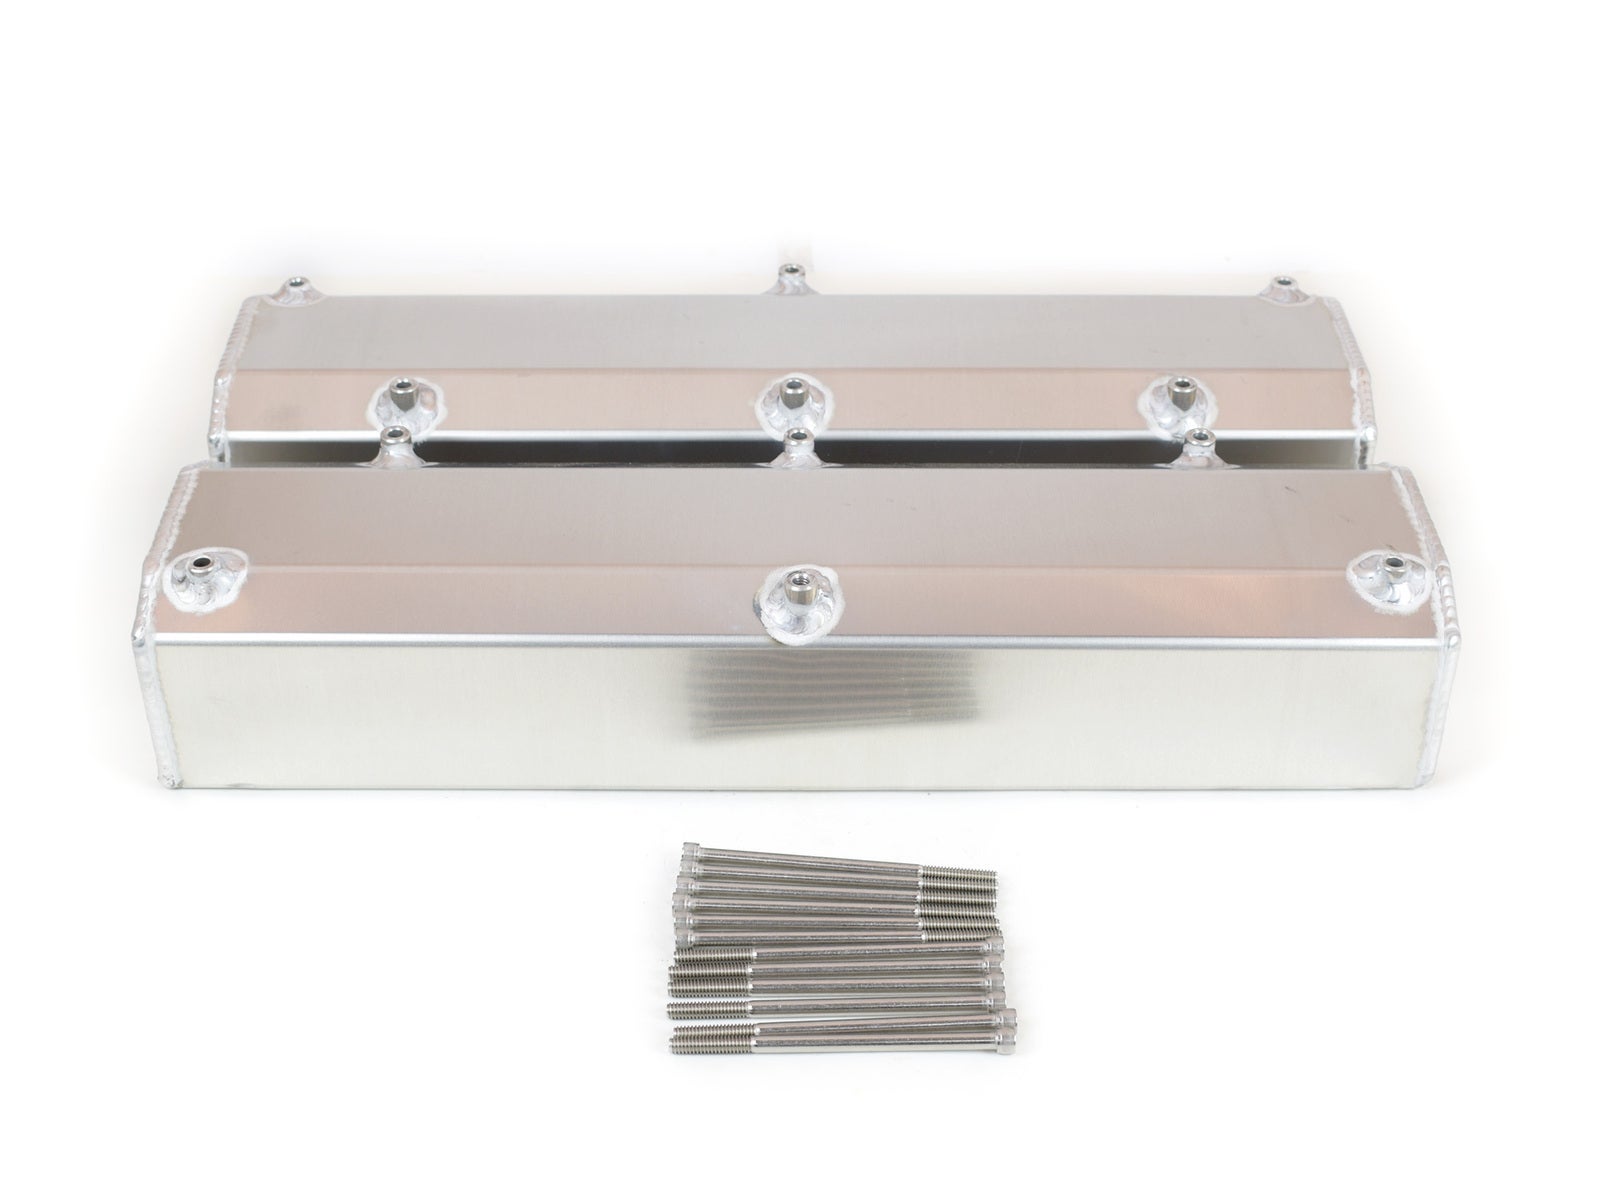 Canton Fabricated Aluminum Valve Cover For 302/351W Ford Small Block Ford Gran Torino Squire 1973 CN65300